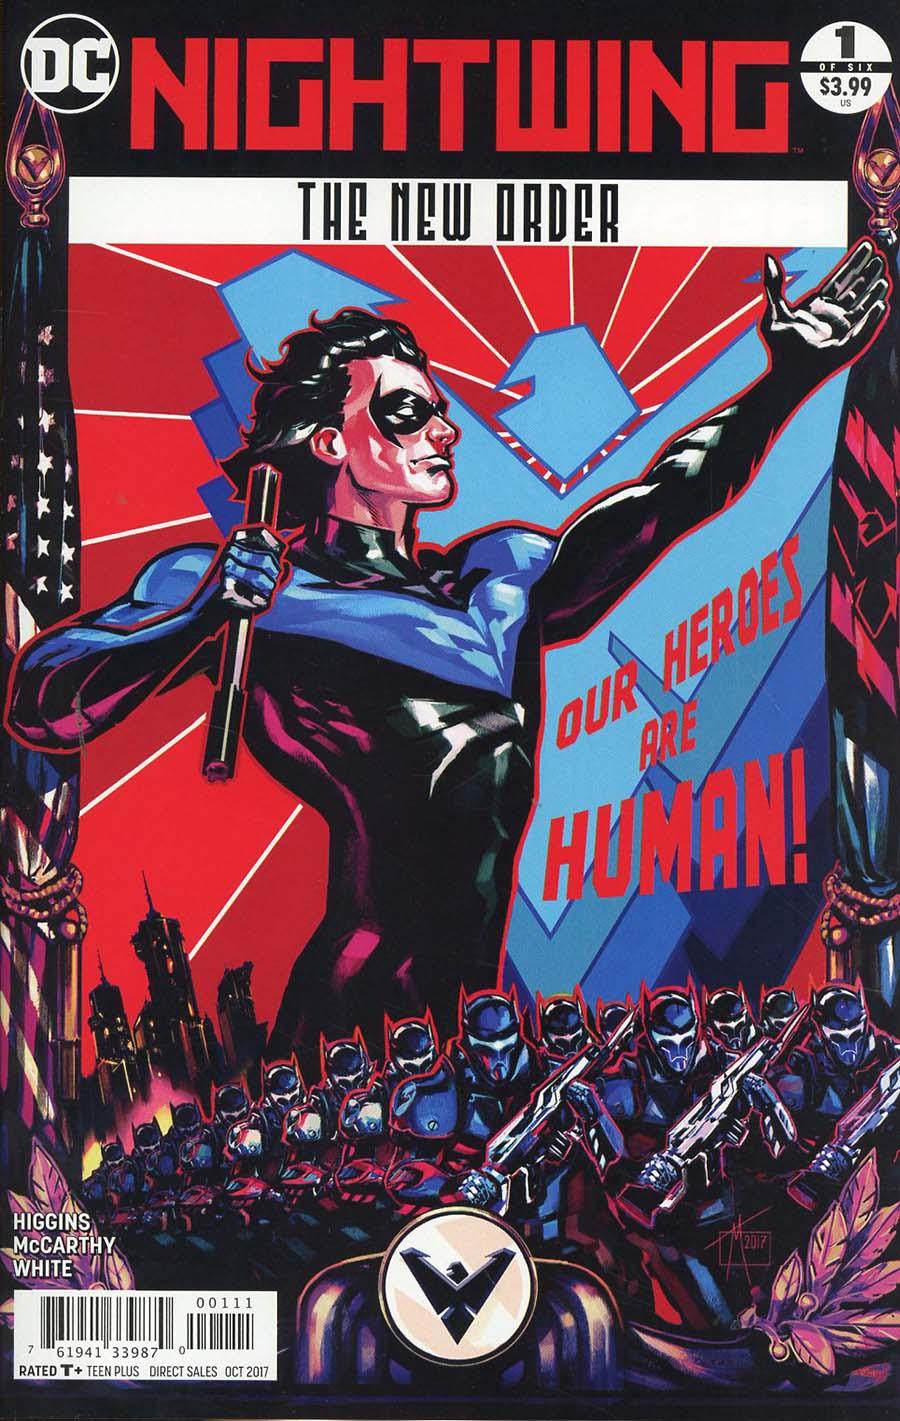 Nightwing The New Order Vol. 1 #1